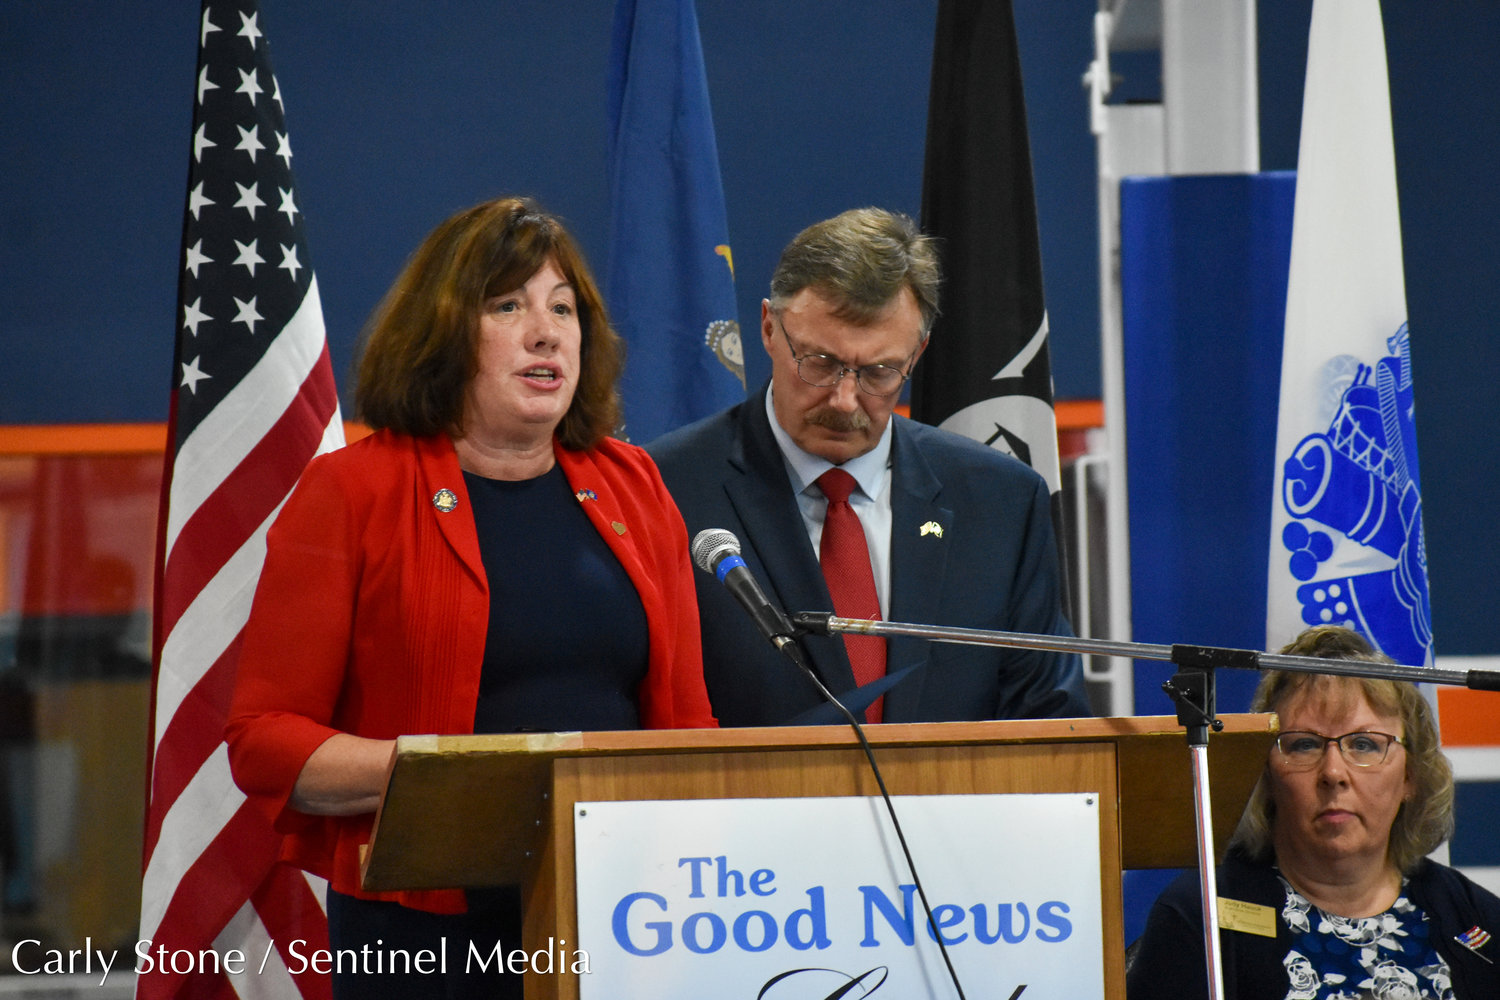 Assemblywoman Marianne Buttenschon and Assemblyman Brian Miller shared some remarks at the 8th Annual Flags for Heroes Recognition Ceremony on November 5, 2022.